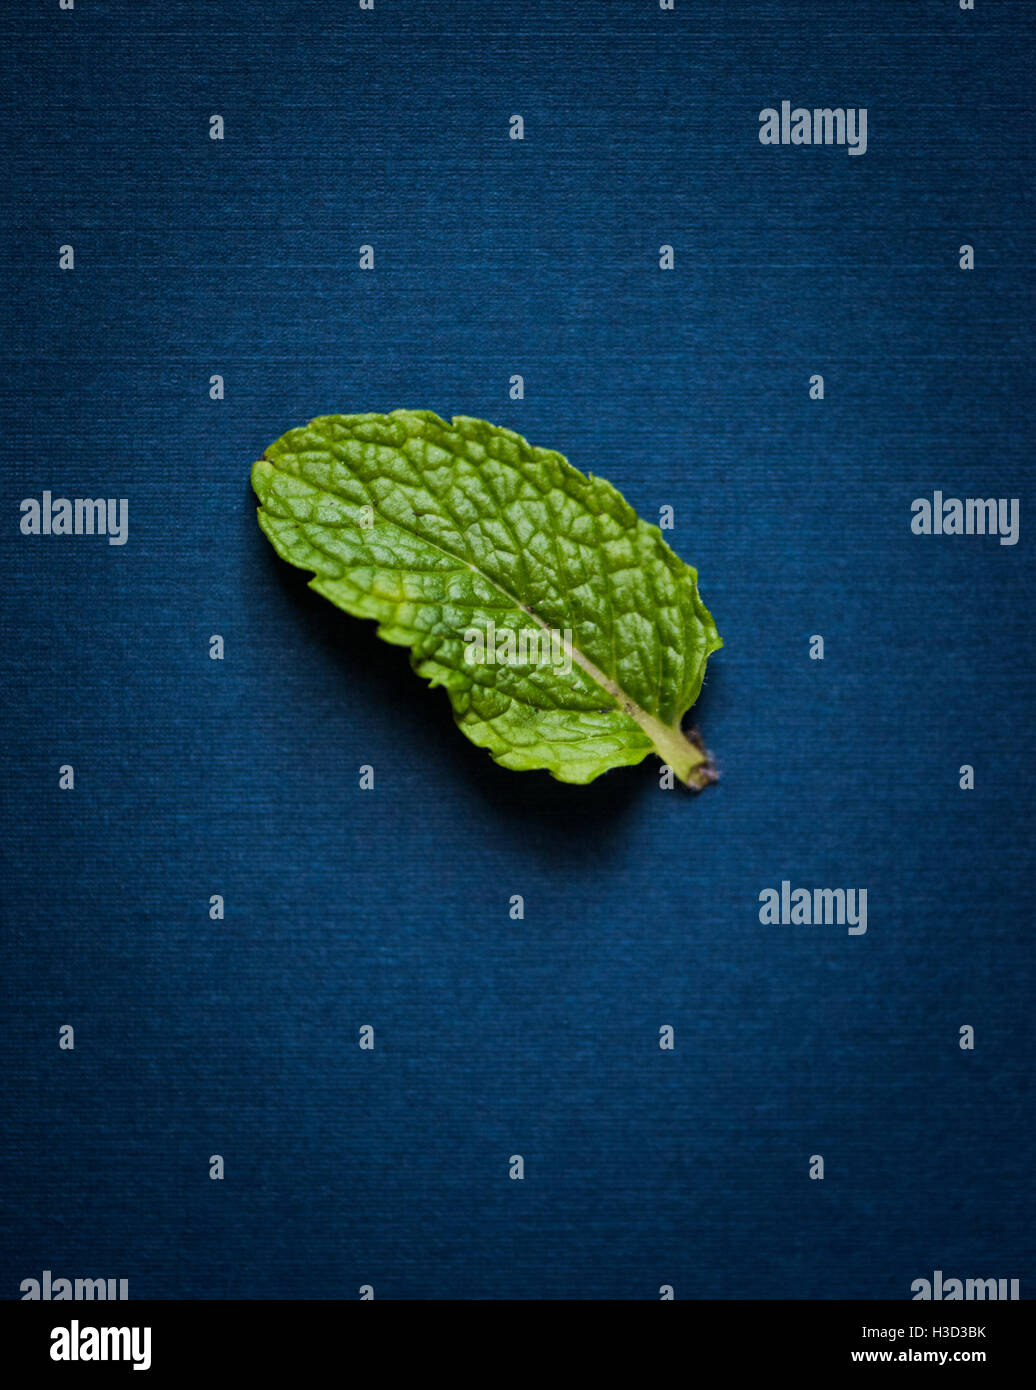 Overhead view of mint leaf on table Stock Photo